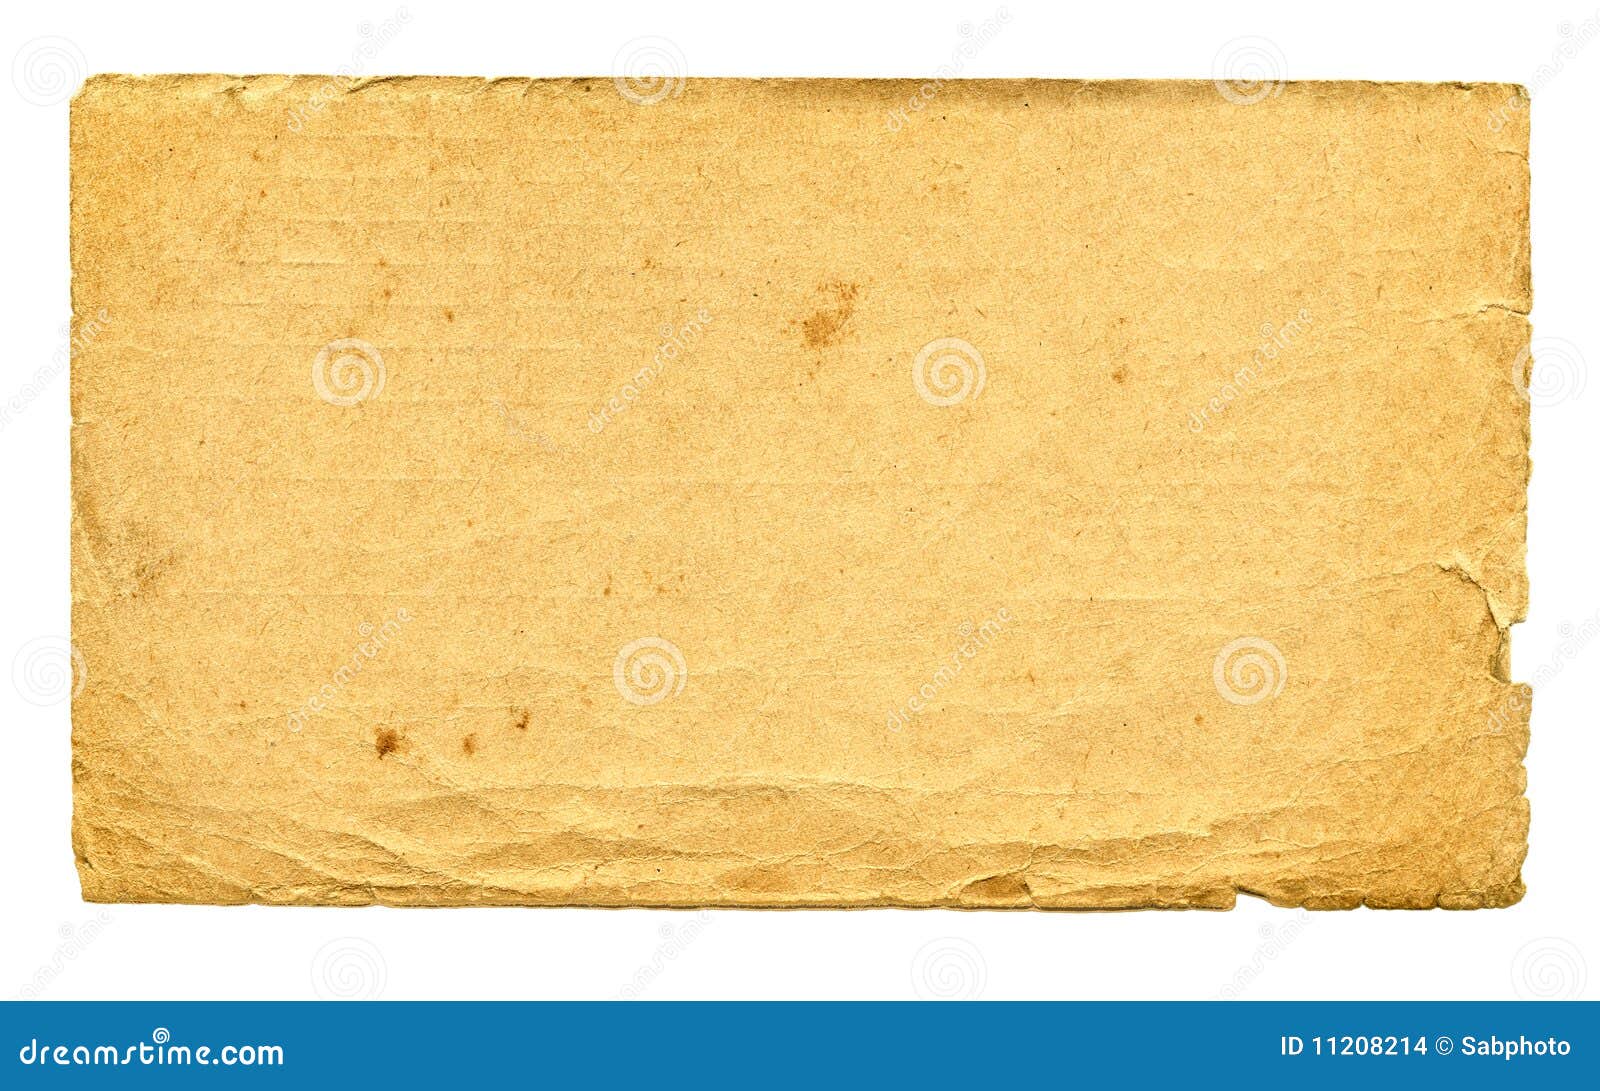 Old paper page stock photo. Image of dirty, page, border - 11208214